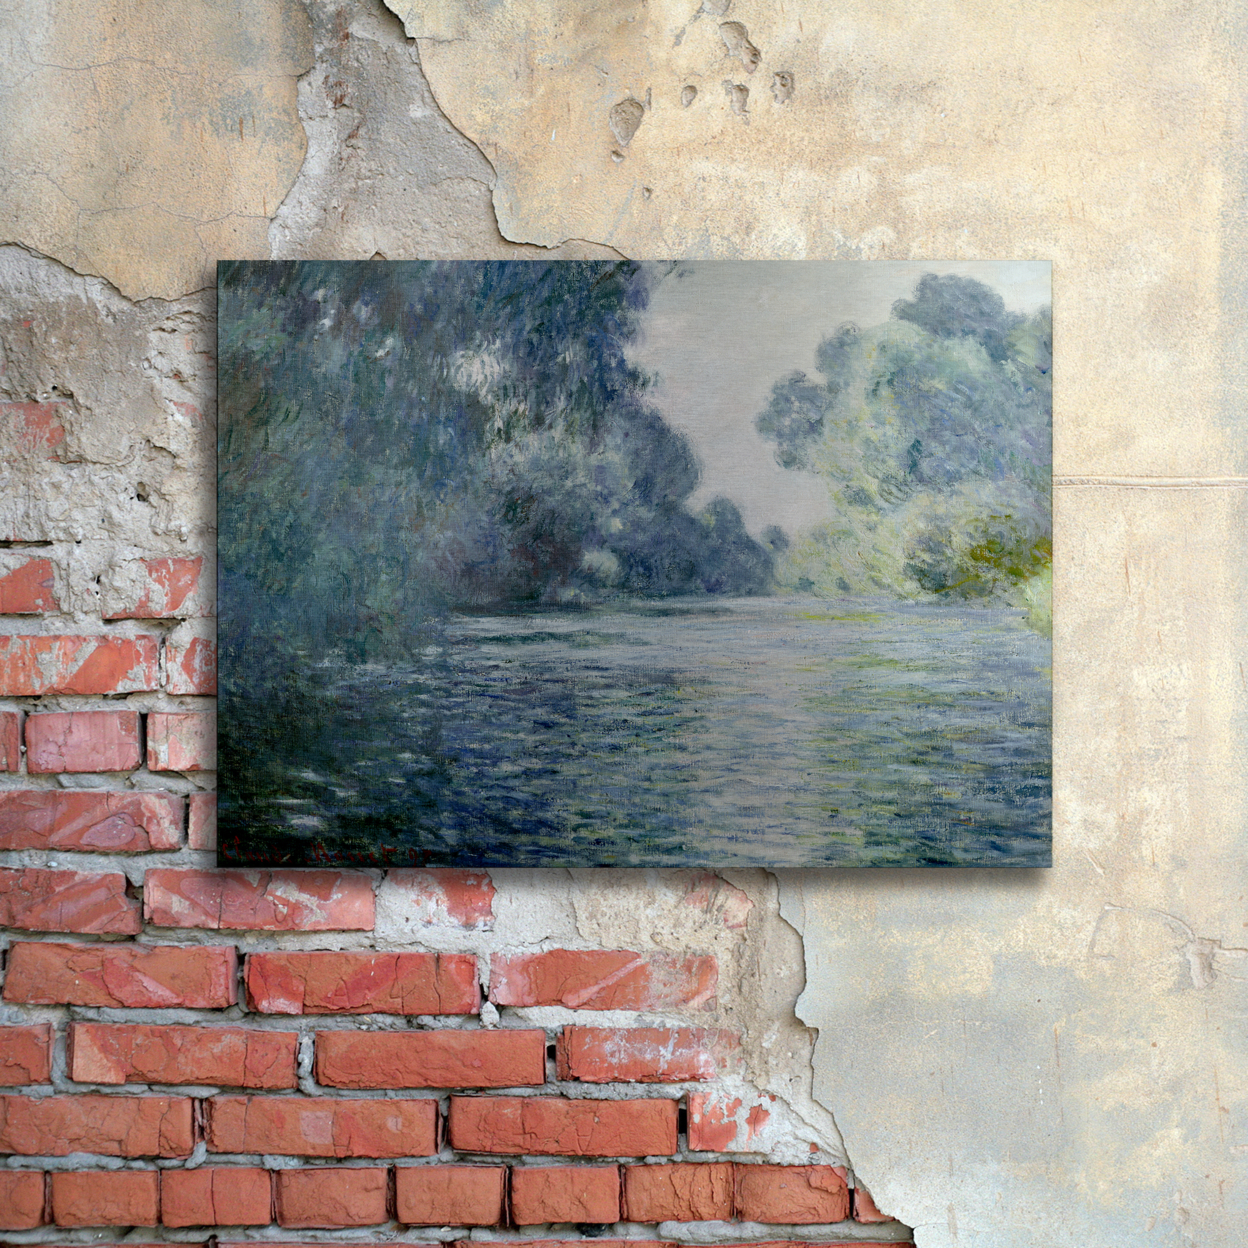 Claude Monet 'Branch Of The Seine' Floating Brushed Aluminum Art 16 X 22